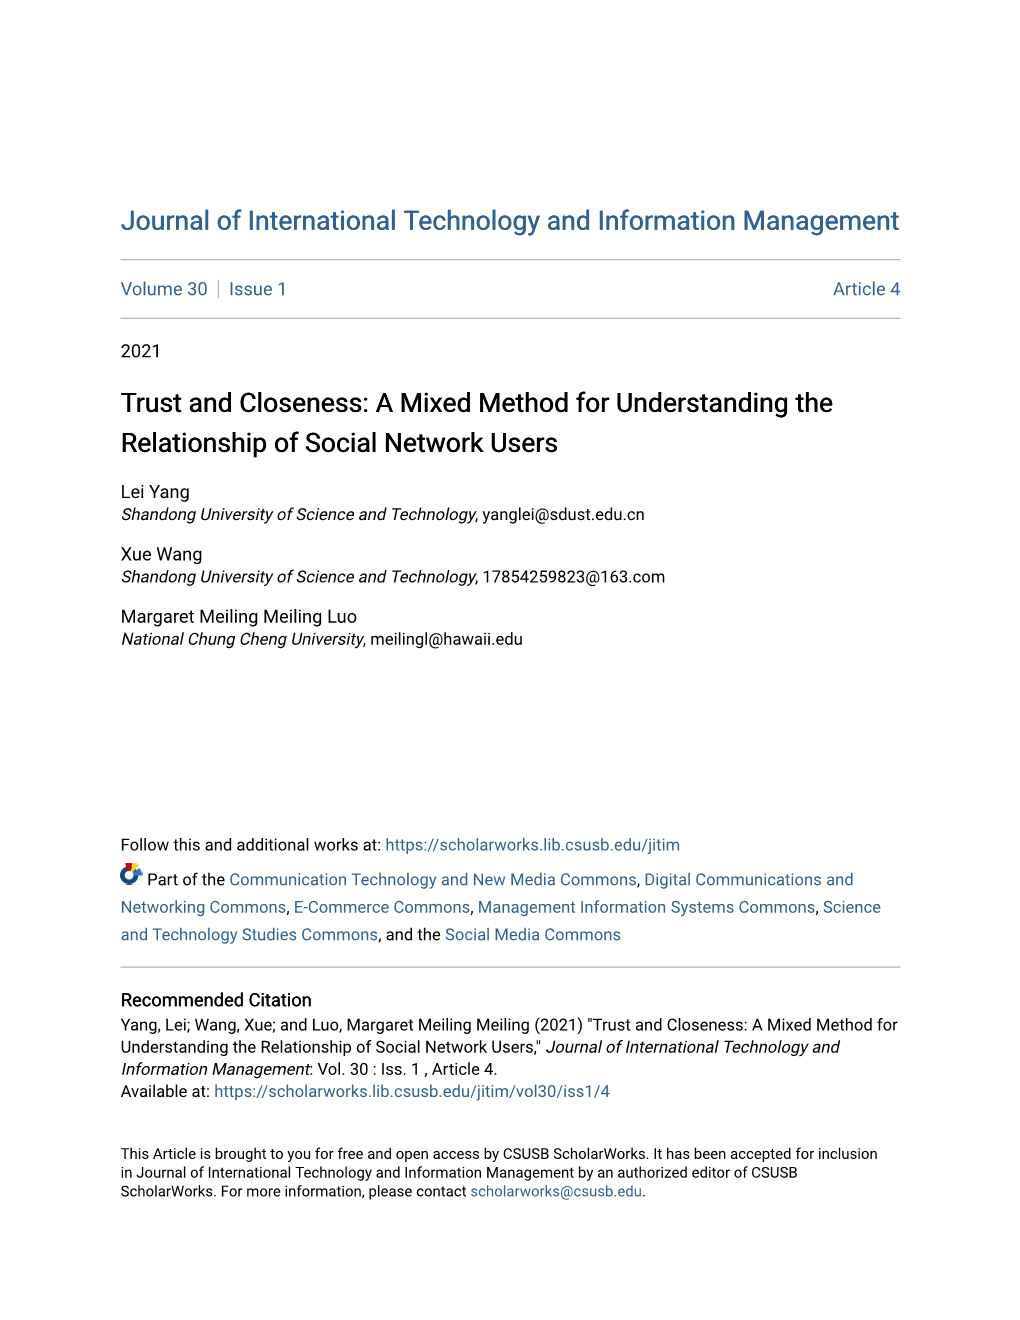 Trust and Closeness: a Mixed Method for Understanding the Relationship of Social Network Users